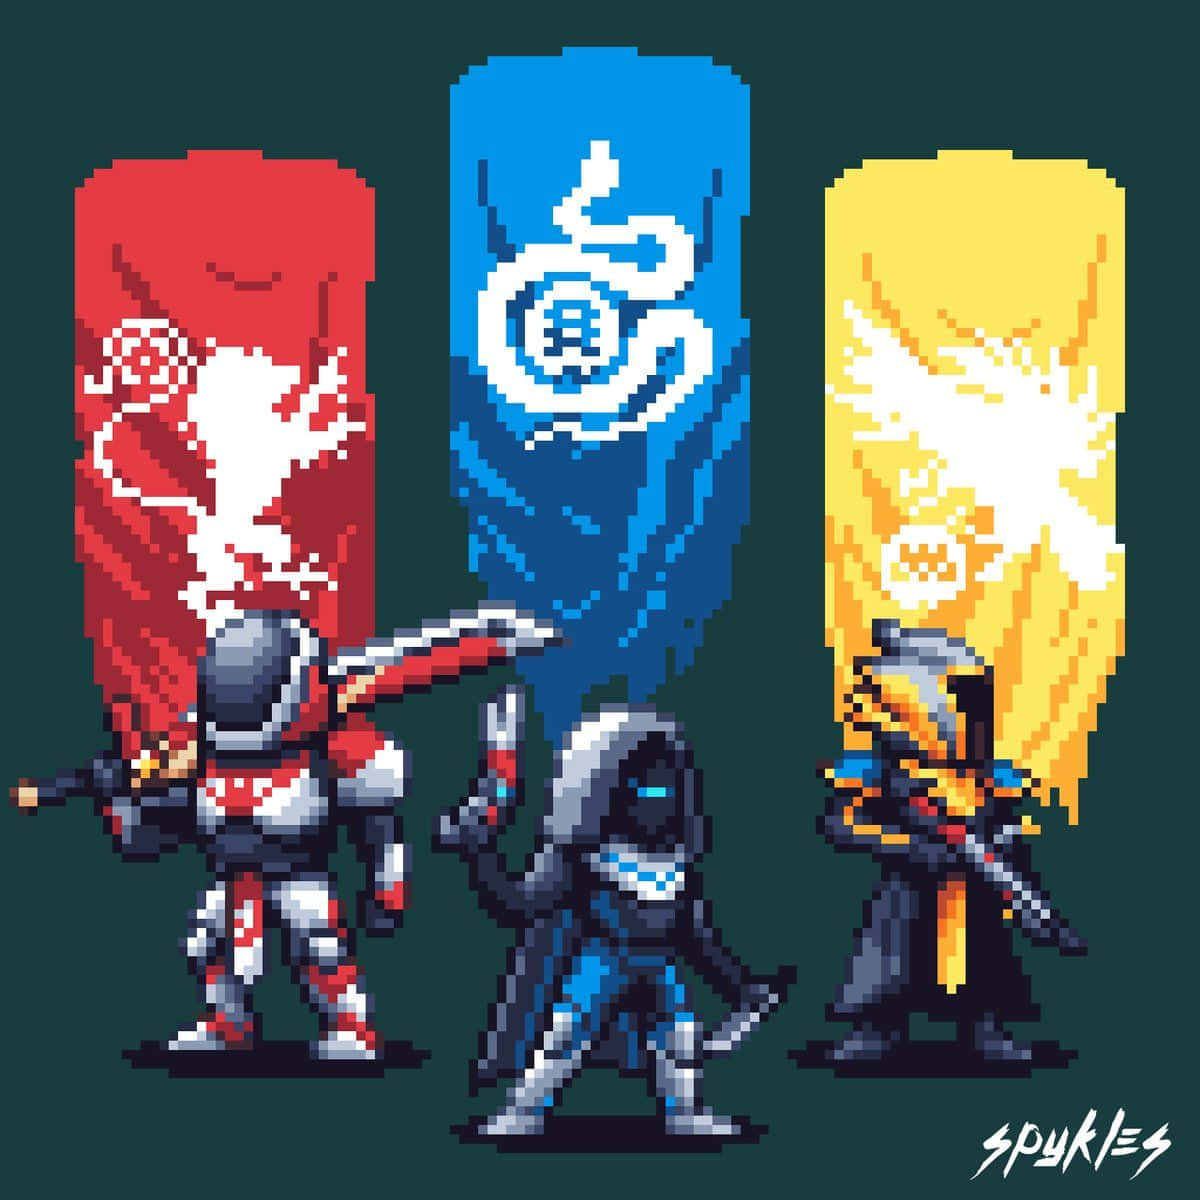 Beautifully Crafted Pixel Art of Bungie's Destiny Wallpaper